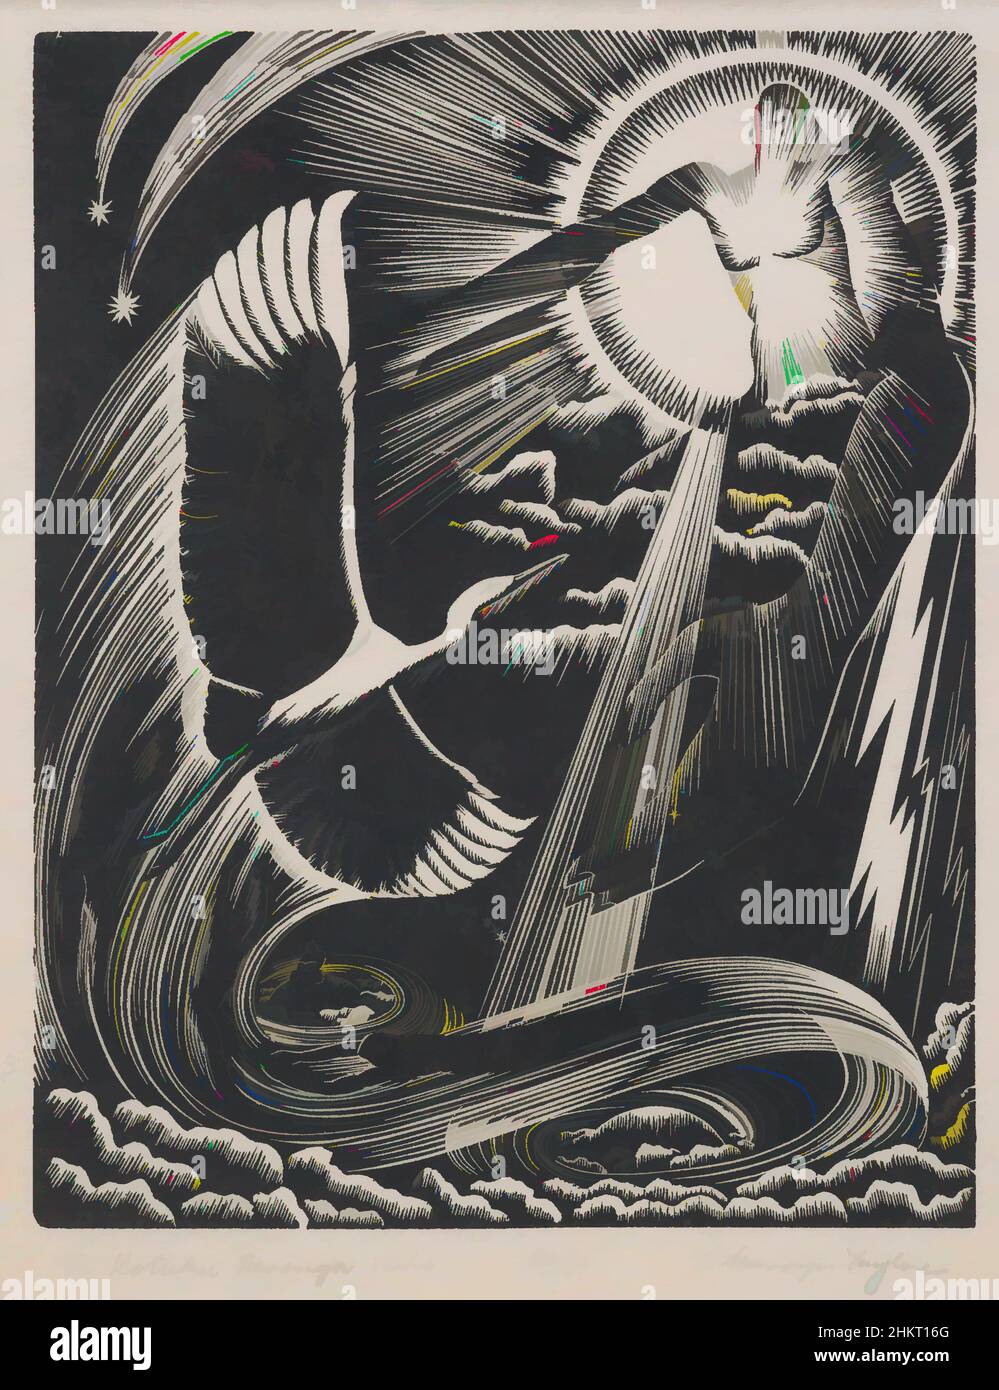 Art inspired by Te kotuku rerenga tahi (The heron of single flight), E Mervyn Taylor, artist, 1953, Wellington, wood engraving, Classic works modernized by Artotop with a splash of modernity. Shapes, color and value, eye-catching visual impact on art. Emotions through freedom of artworks in a contemporary way. A timeless message pursuing a wildly creative new direction. Artists turning to the digital medium and creating the Artotop NFT Stock Photo